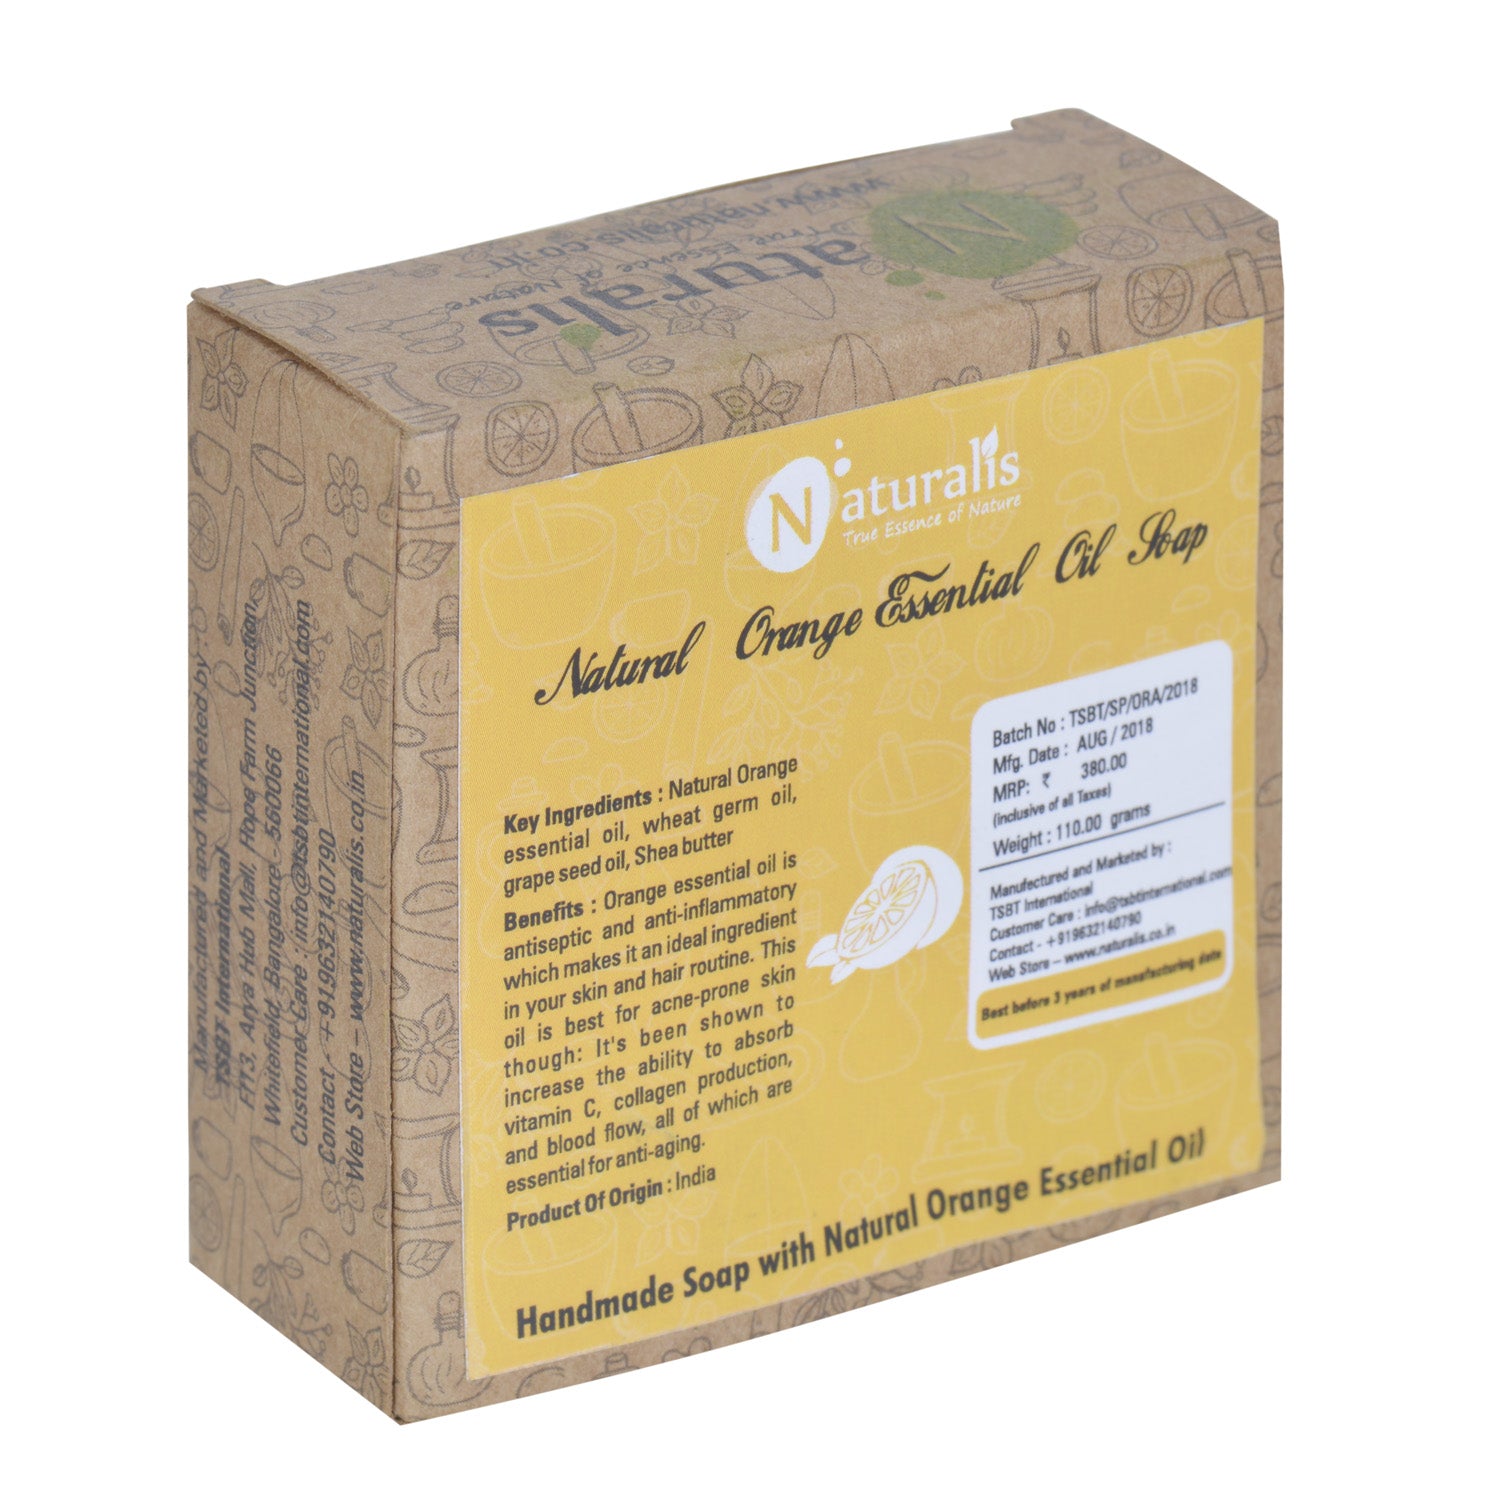 Handmade Soap with Natural Essential Oil Pack of Fifteen - Naturalis